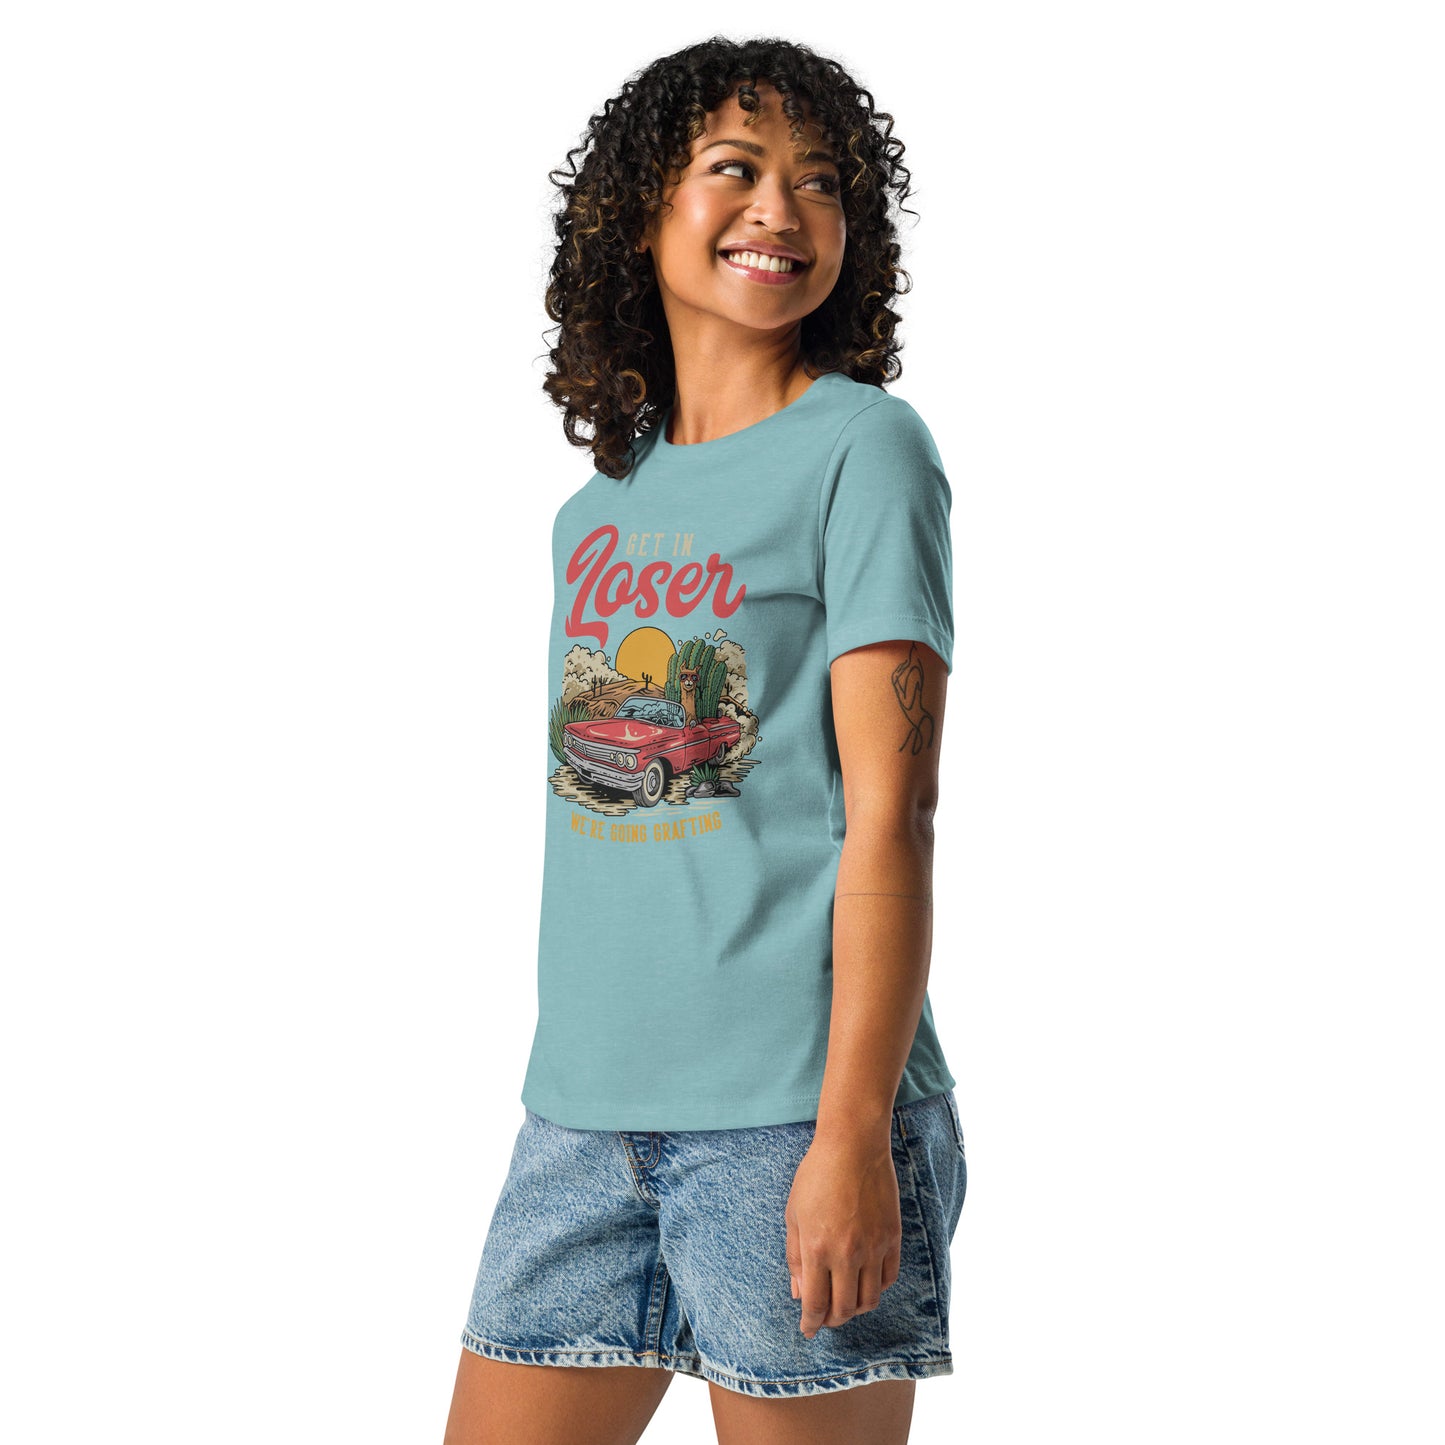 Get in Loser women's relaxed t-shirt